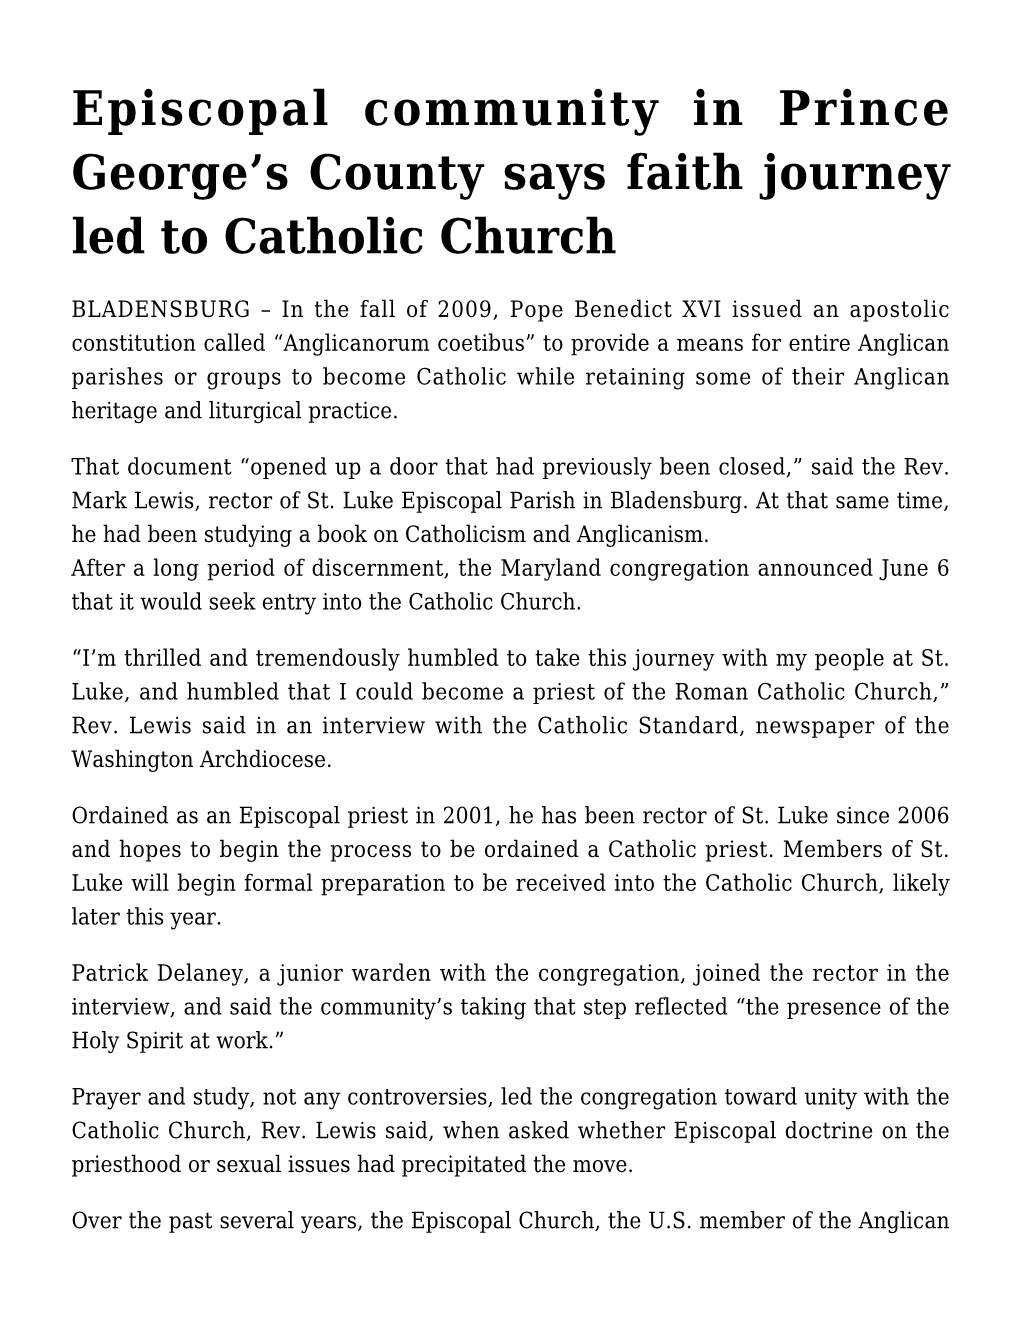 Episcopal Community in Prince George's County Says Faith Journey